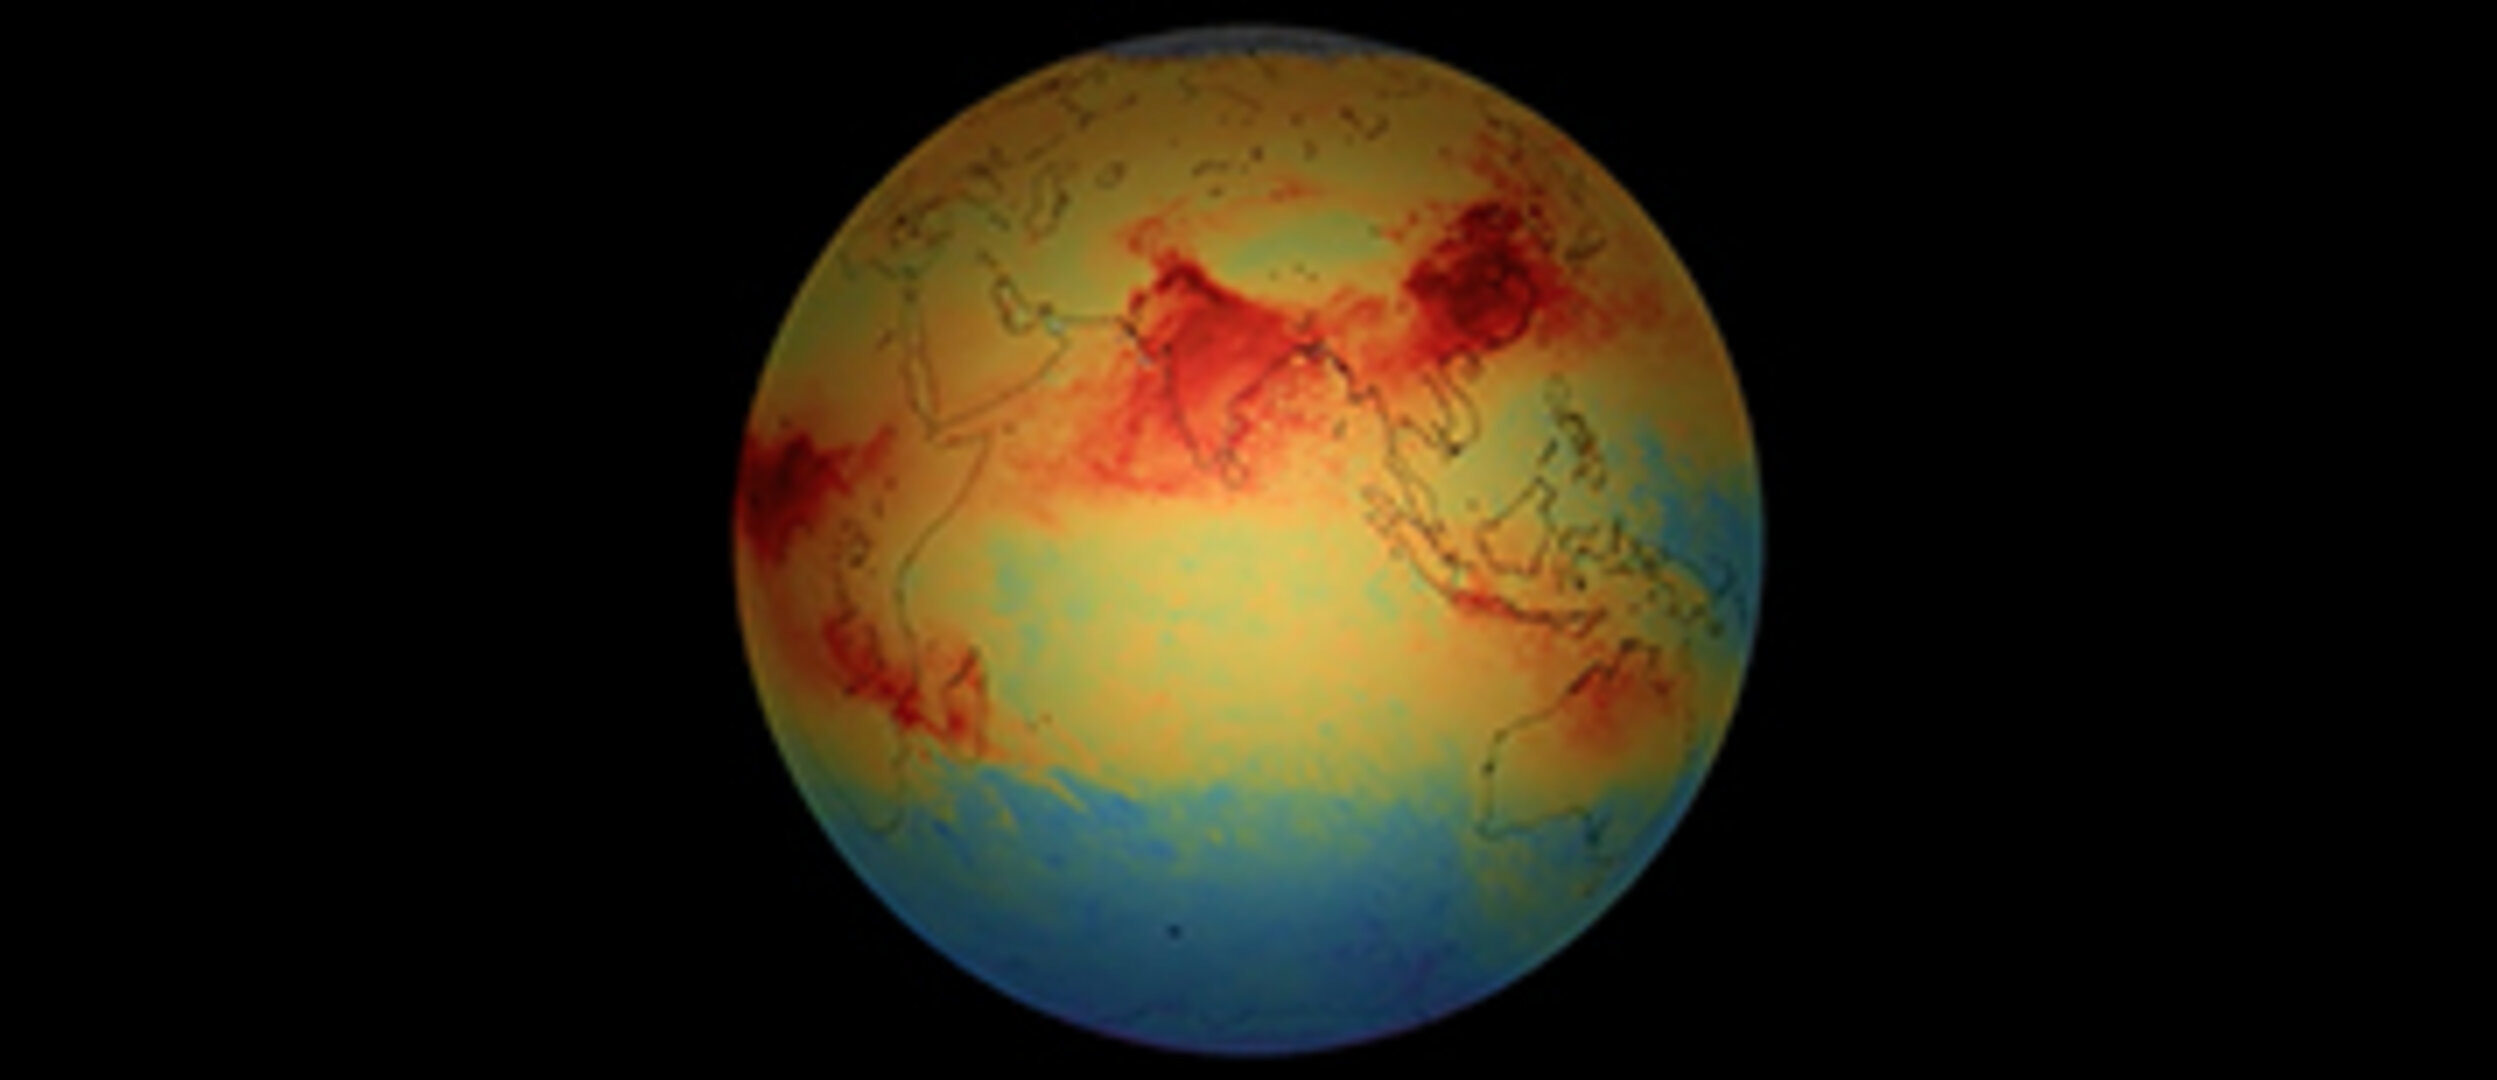 Red shows the densest areas of carbon monoxide